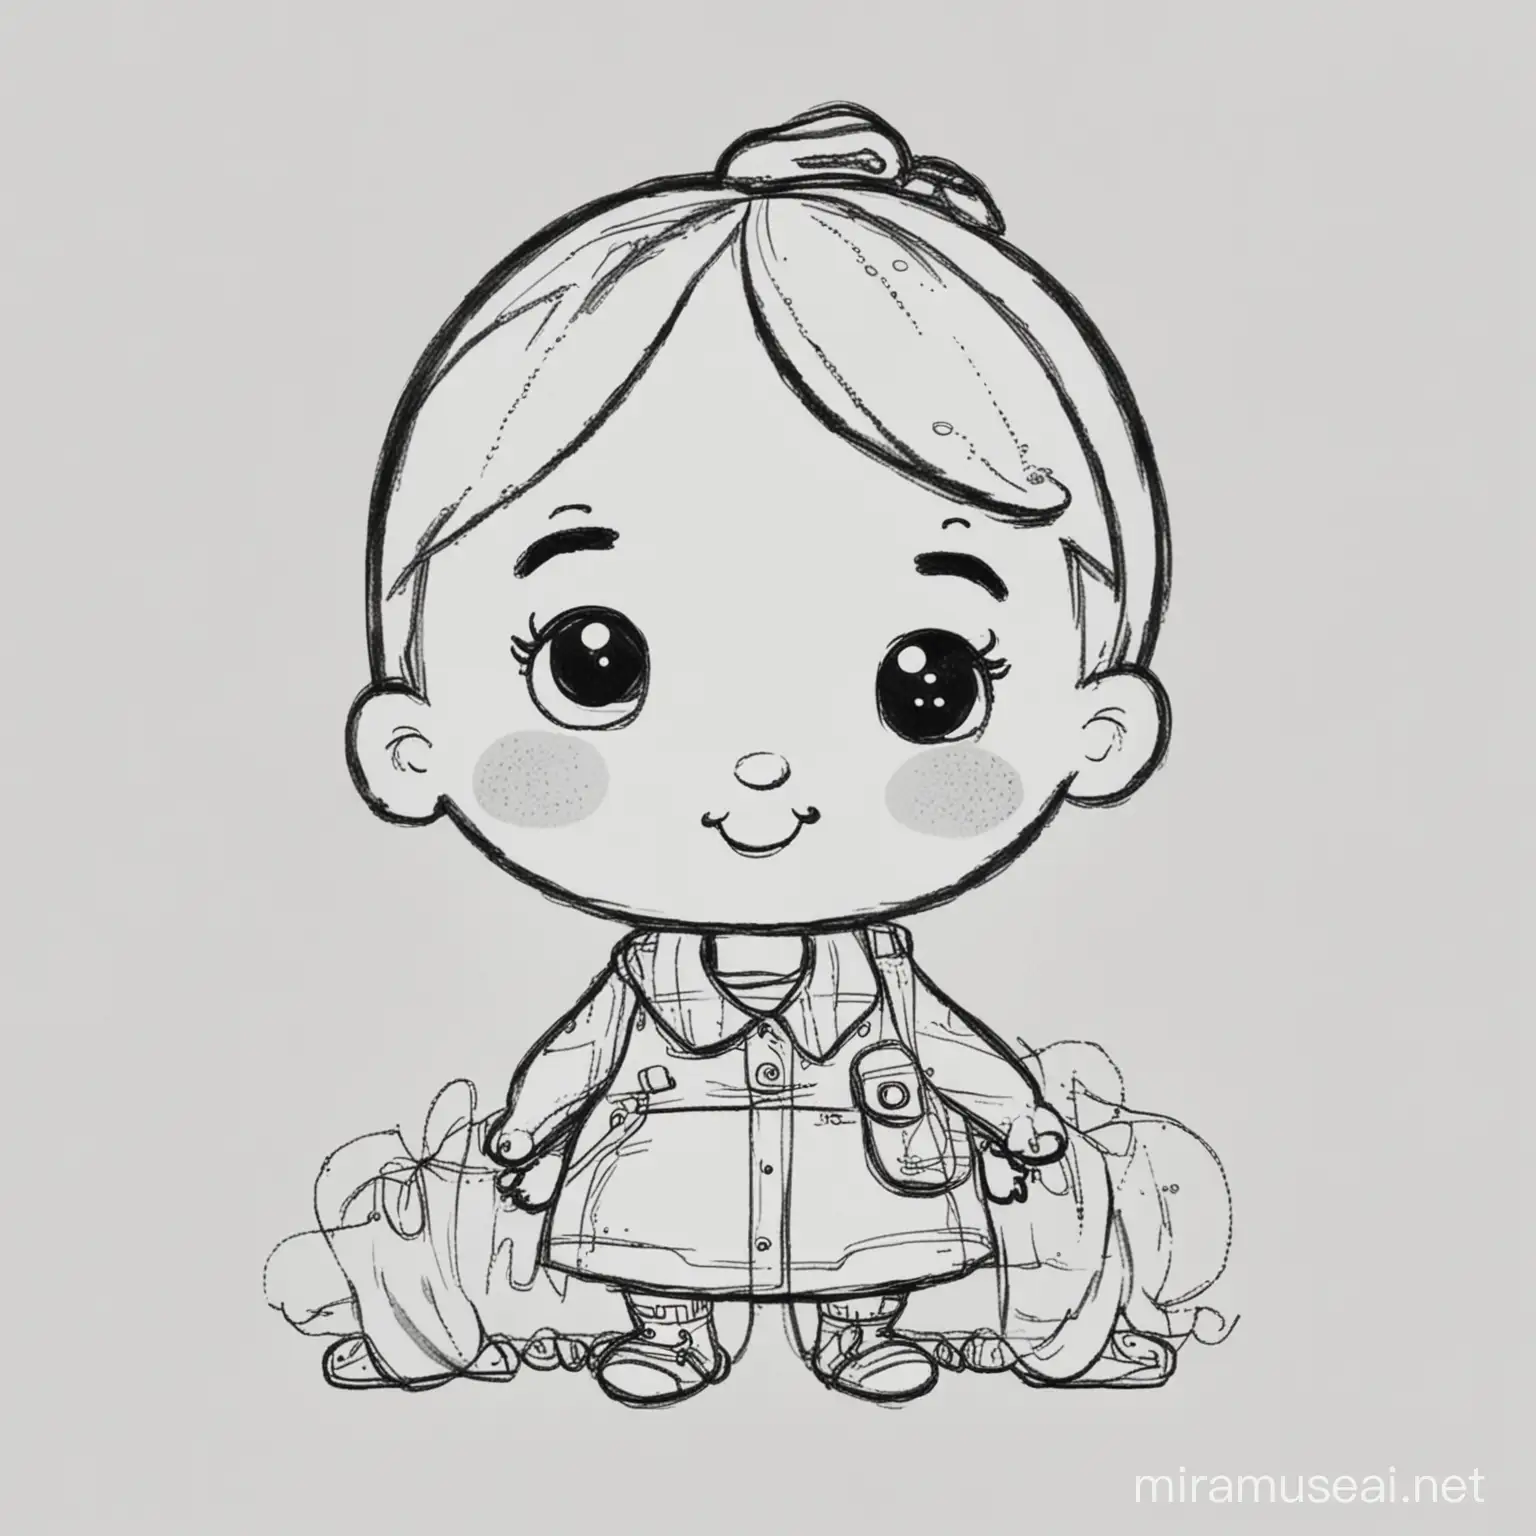 Cocomelon Coloring Page for Kids Cartoon Style with Thick Lines